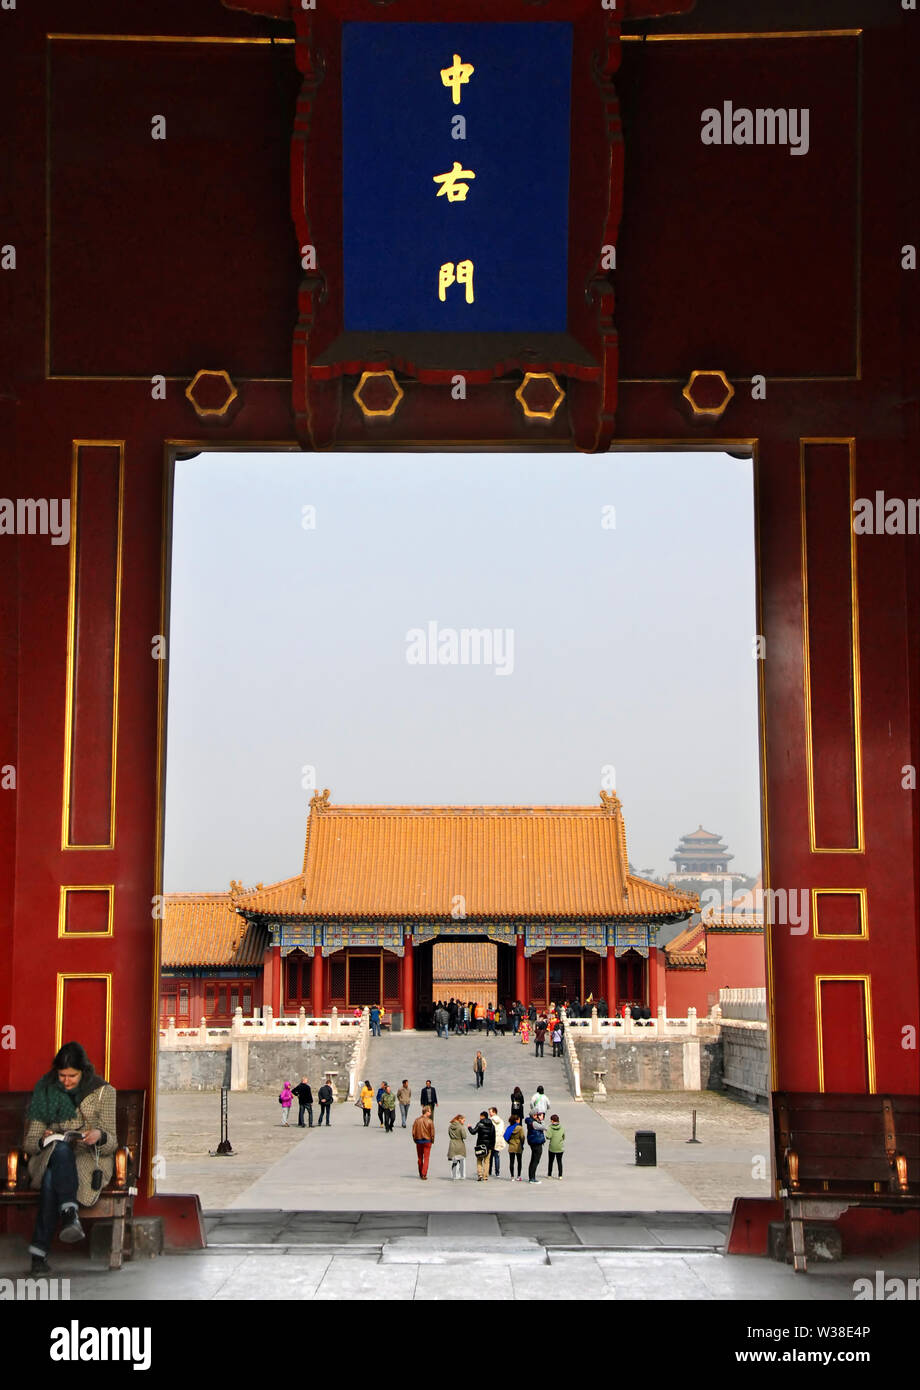 View inside the Forbidden City, Beijing. The Forbidden City has traditional Chinese architecture. The Forbidden City is also the Palace Museum Beijing Stock Photo